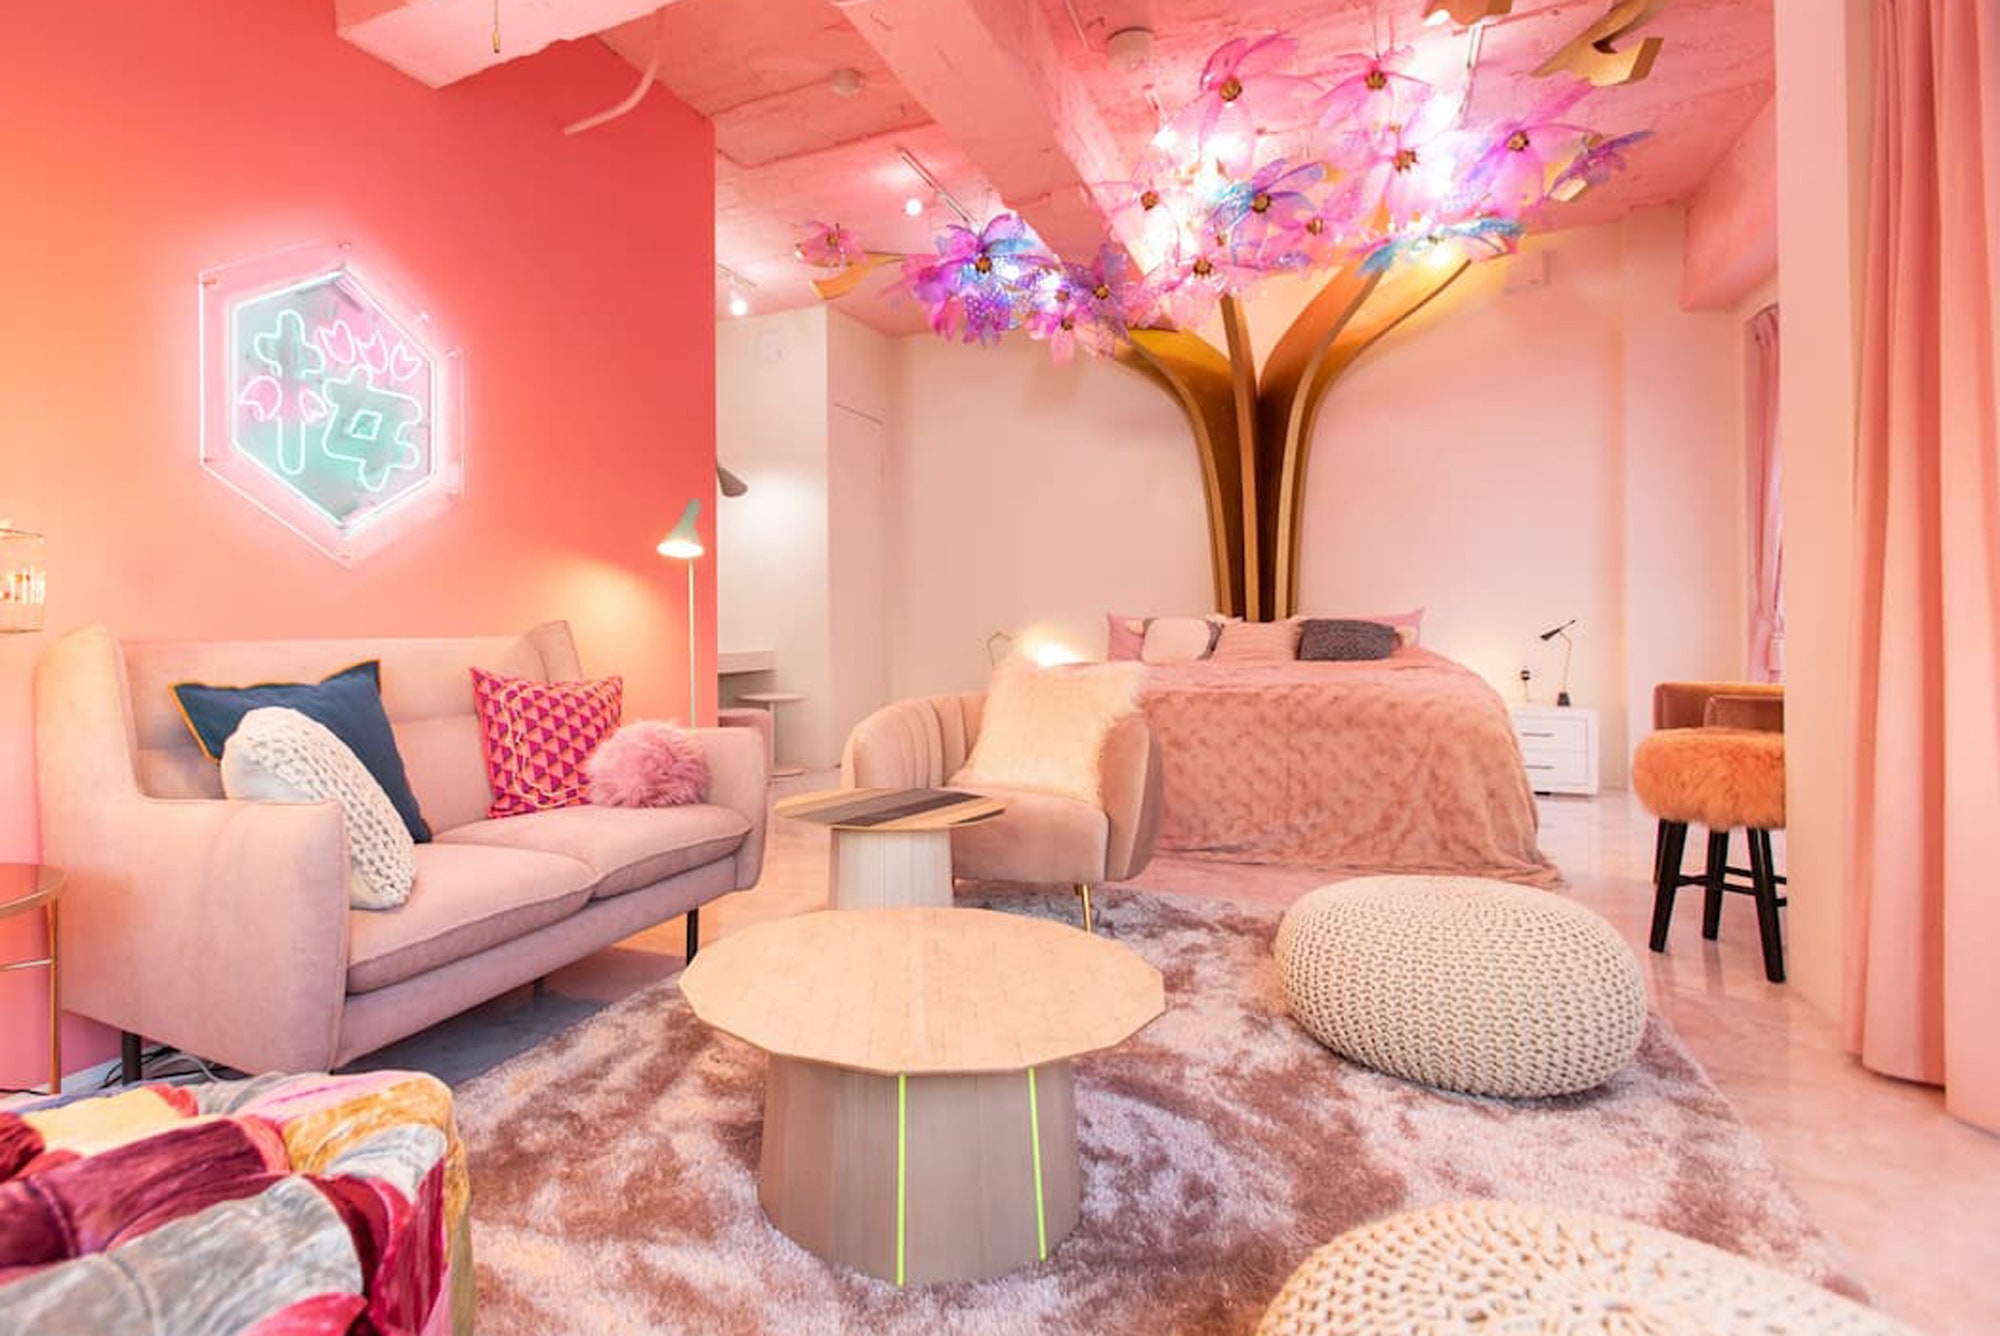 <p>If Hello Kitty could call a home her own, this would be it. Blooming with cherry blossoms and bursting with pink, this sakura-inspired Airbnb is camera ready from the moment you walk in the door. Even the ceiling is printed with the motif of the flower. The one-bedroom is also just minutes away from <a href="https://www.cntraveler.com/gallery/what-to-do-in-harajuku-our-guide?mbid=synd_msn_rss&utm_source=msn&utm_medium=syndication">Tokyo’s Harajuku neighborhood</a>, full of quirky fashion and dessert shops to enjoy.</p> <p><strong>Bed & bath:</strong> 1 bedroom, 1 bath</p> <div class="callout"><p><a href="https://airbnb.pvxt.net/LXn2rM?trafcat=summer23" title="Book now at Airbnb">Book now at Airbnb</a></p> </div><p>Sign up to receive the latest news, expert tips, and inspiration on all things travel.</p><a href="https://www.cntraveler.com/newsletter/the-daily?sourceCode=msnsend">Inspire Me</a>